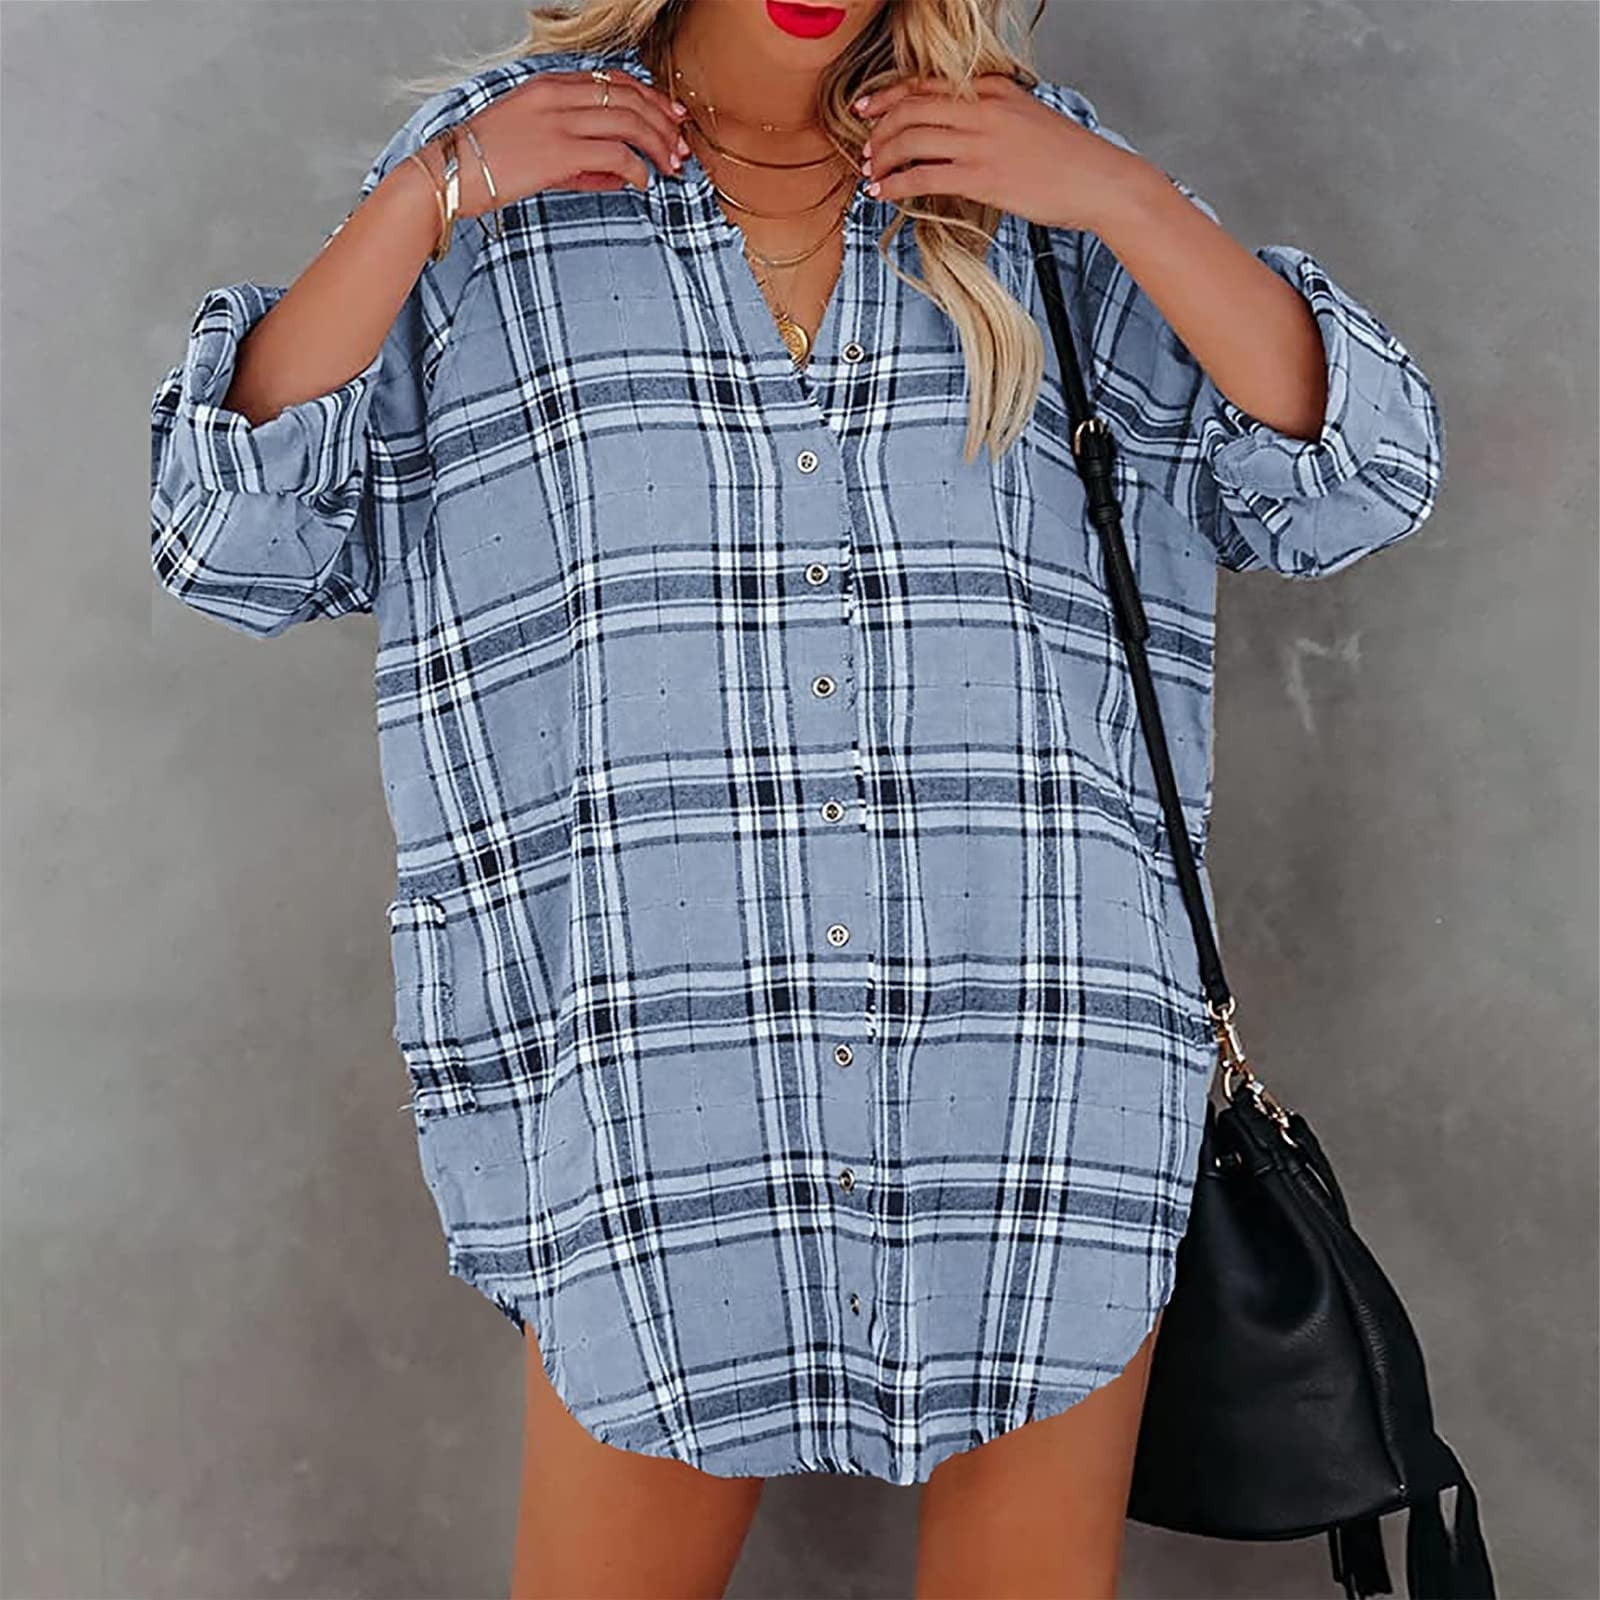 Vintage plaid jumper dress, side buttons, pockets, no tags. Feels